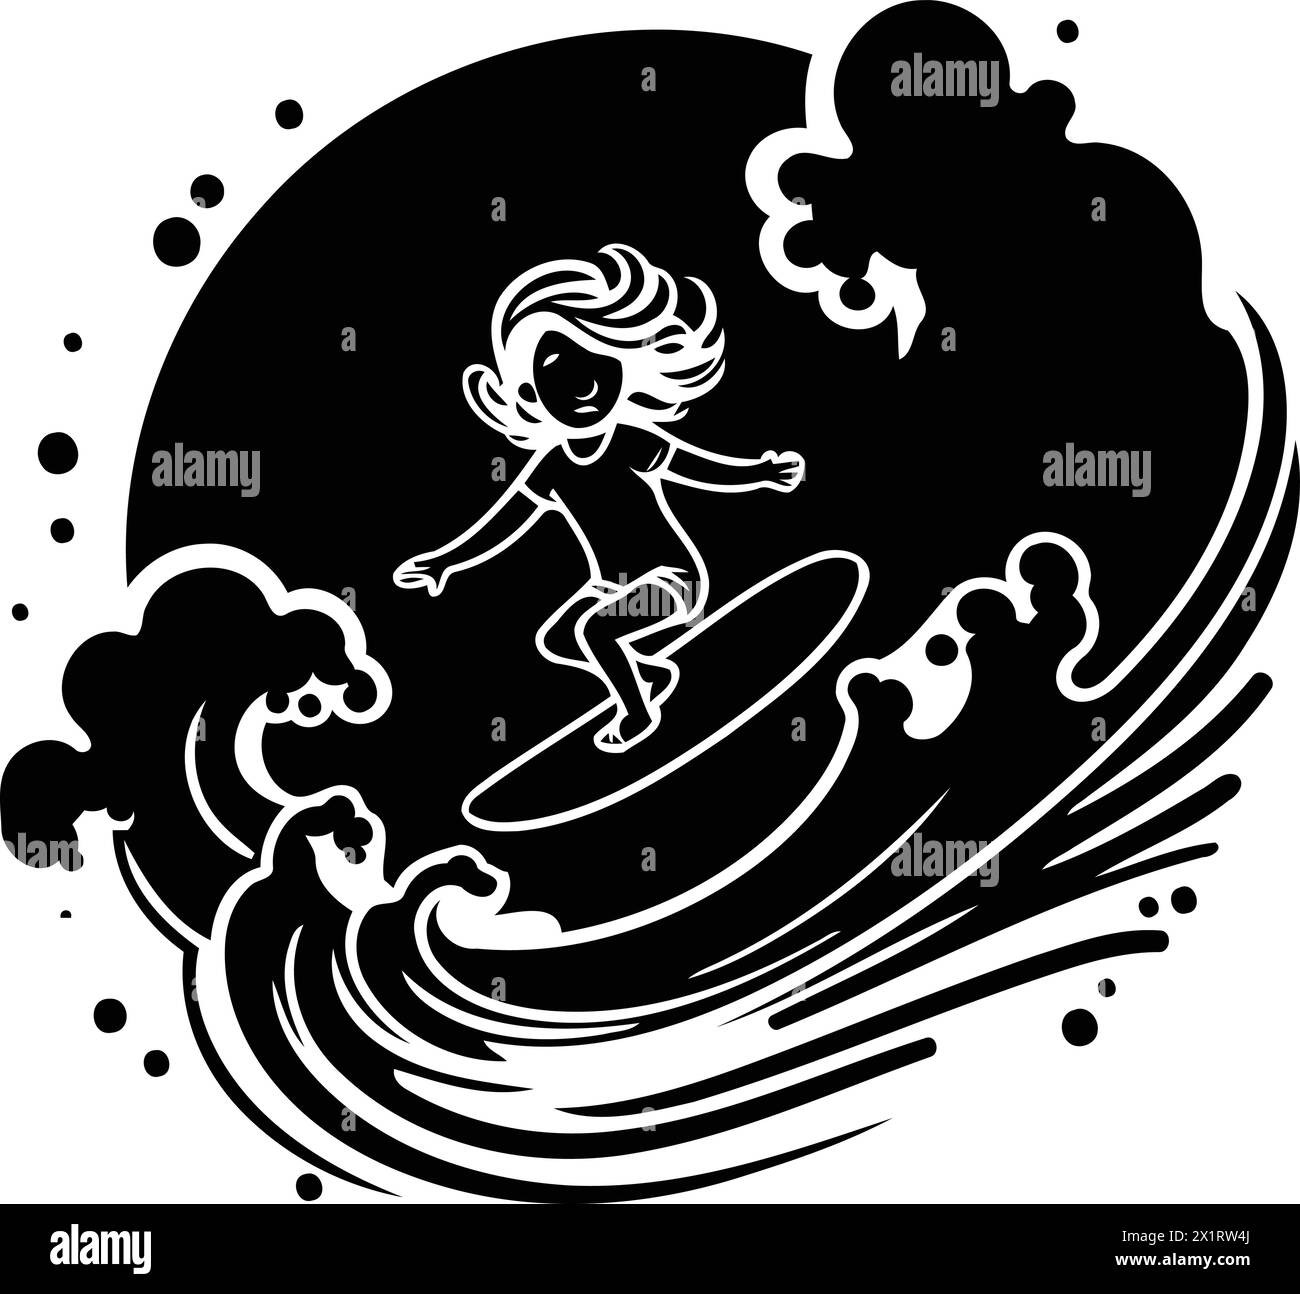 Surfer girl riding a wave. Vector illustration. Isolated on dark background. Stock Vector